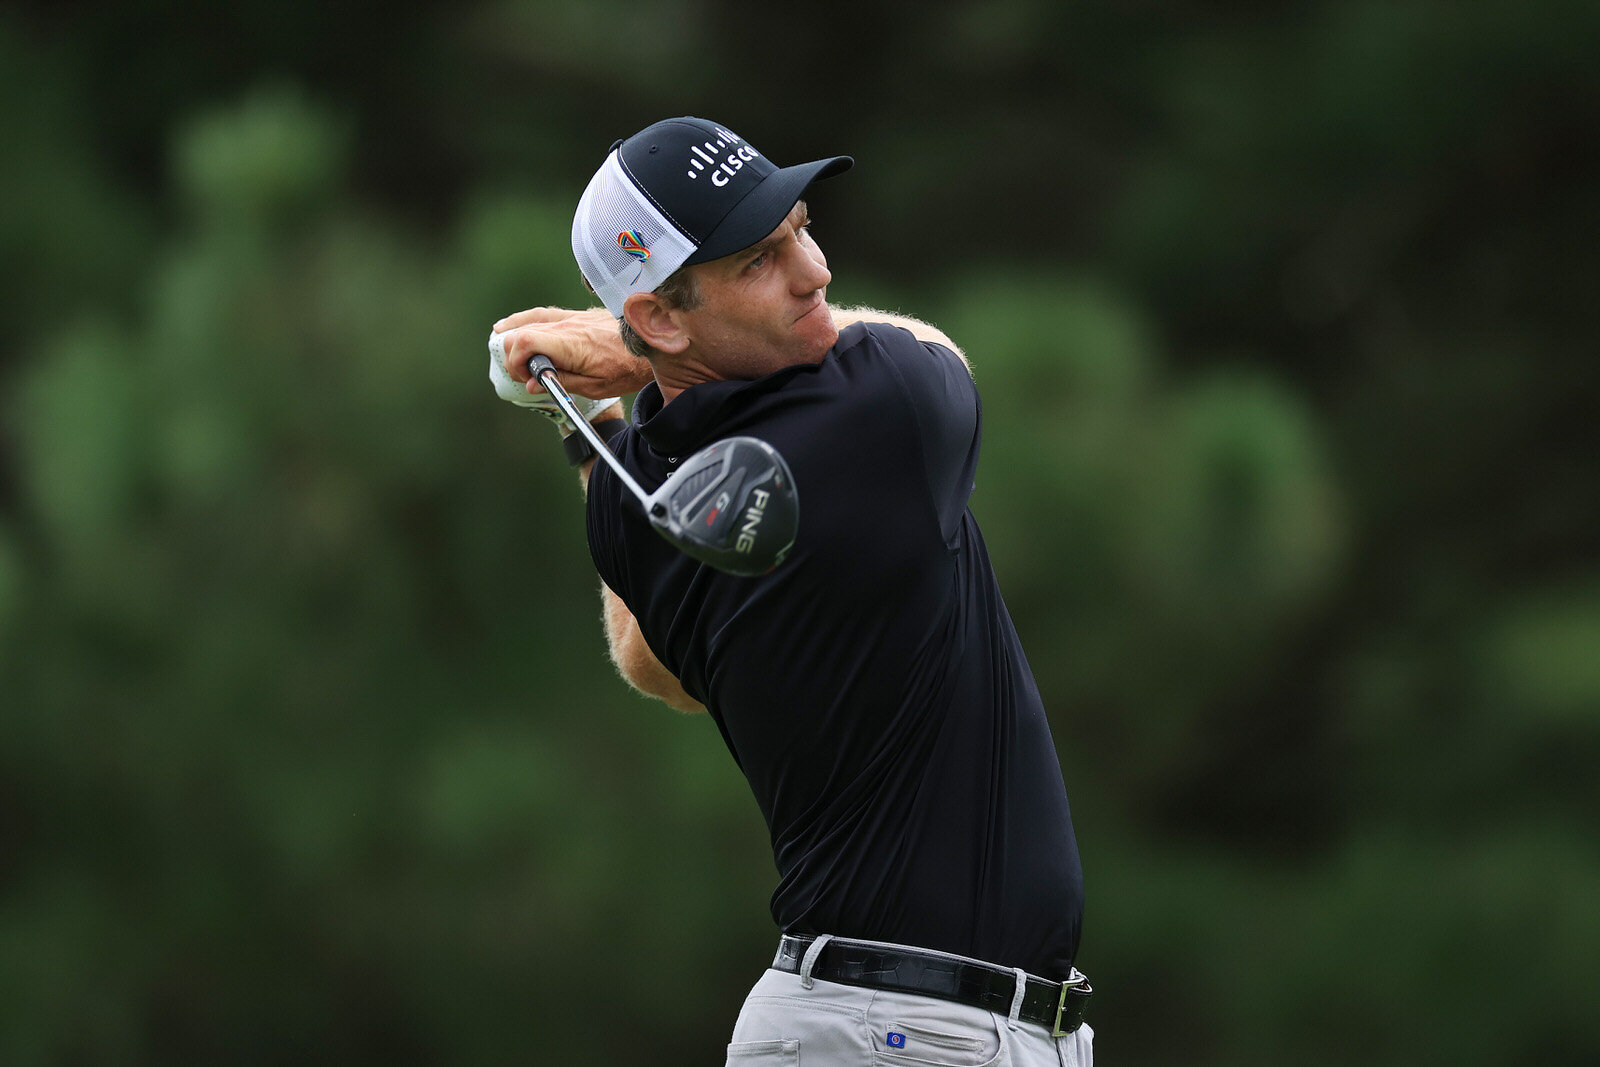  MEMPHIS, TENNESSEE - AUGUST 01: Brendon Todd of the United States plays his shot from the 17th tee during the third round of the World Golf Championship-FedEx St Jude Invitational at TPC Southwind on August 01, 2020 in Memphis, Tennessee. (Photo by 